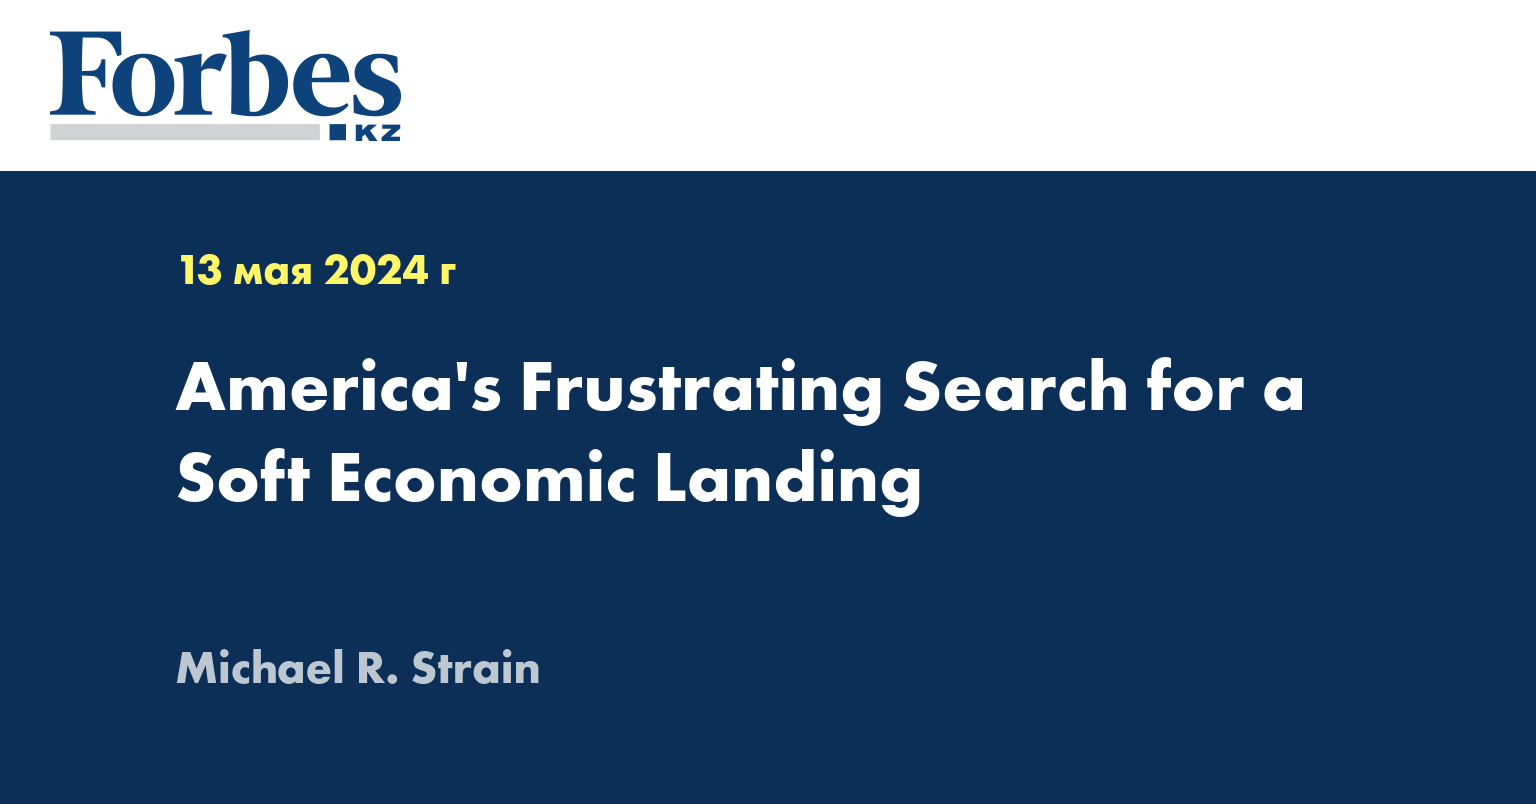 America's Frustrating Search for a Soft Economic Landing